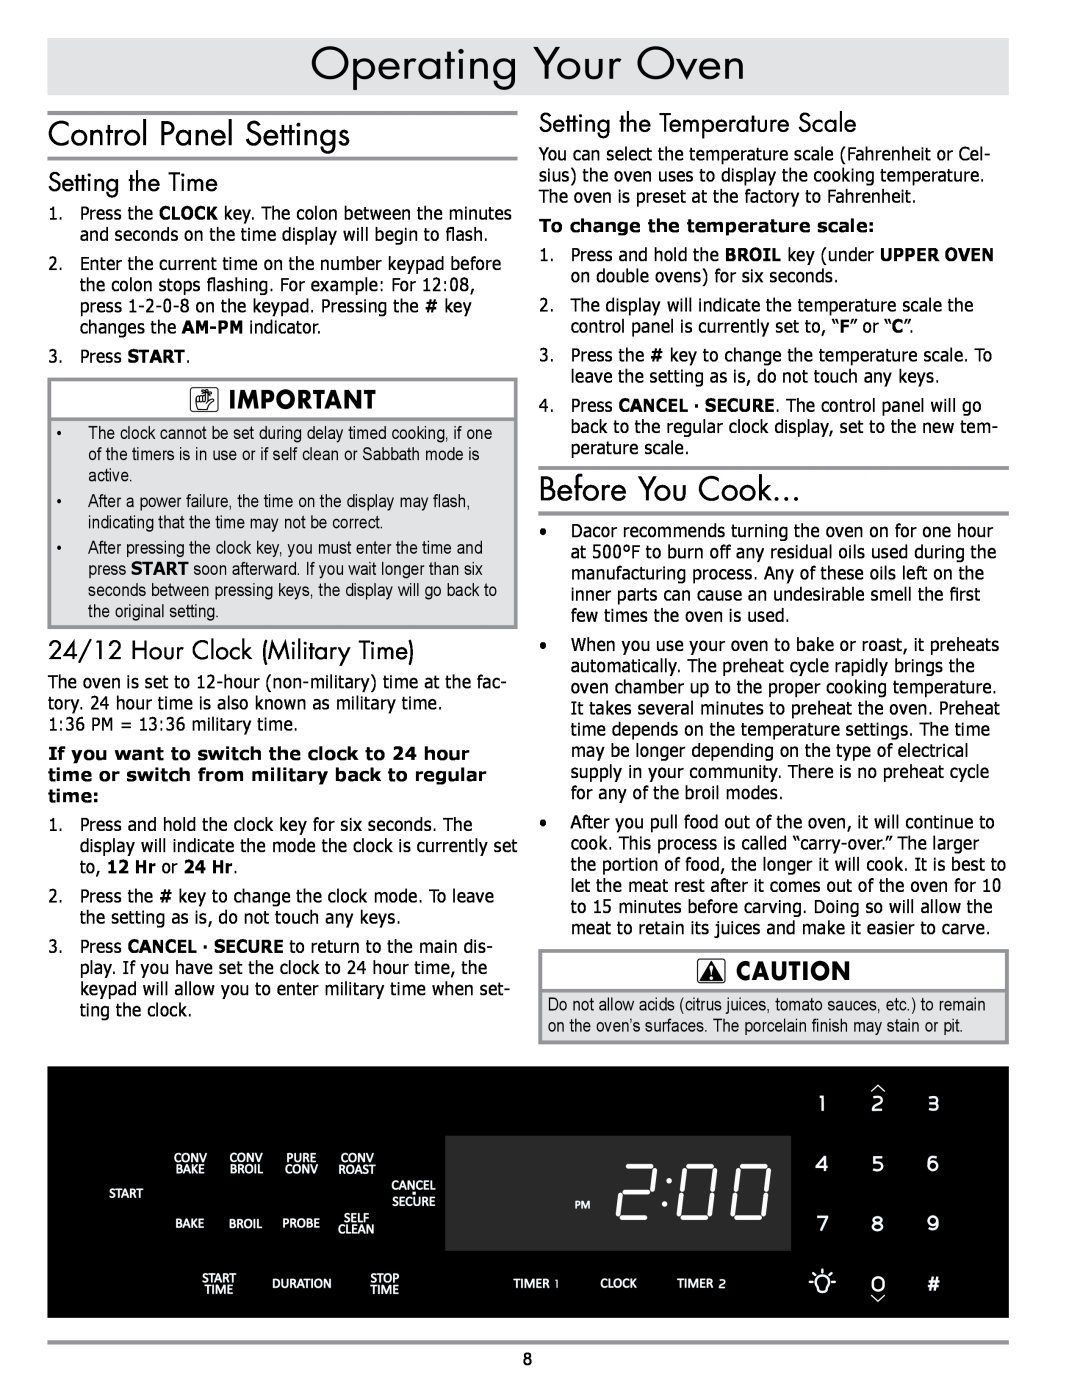 Sears EORD230 manual Operating Your Oven, Control Panel Settings, Before You Cook, Setting the Time 